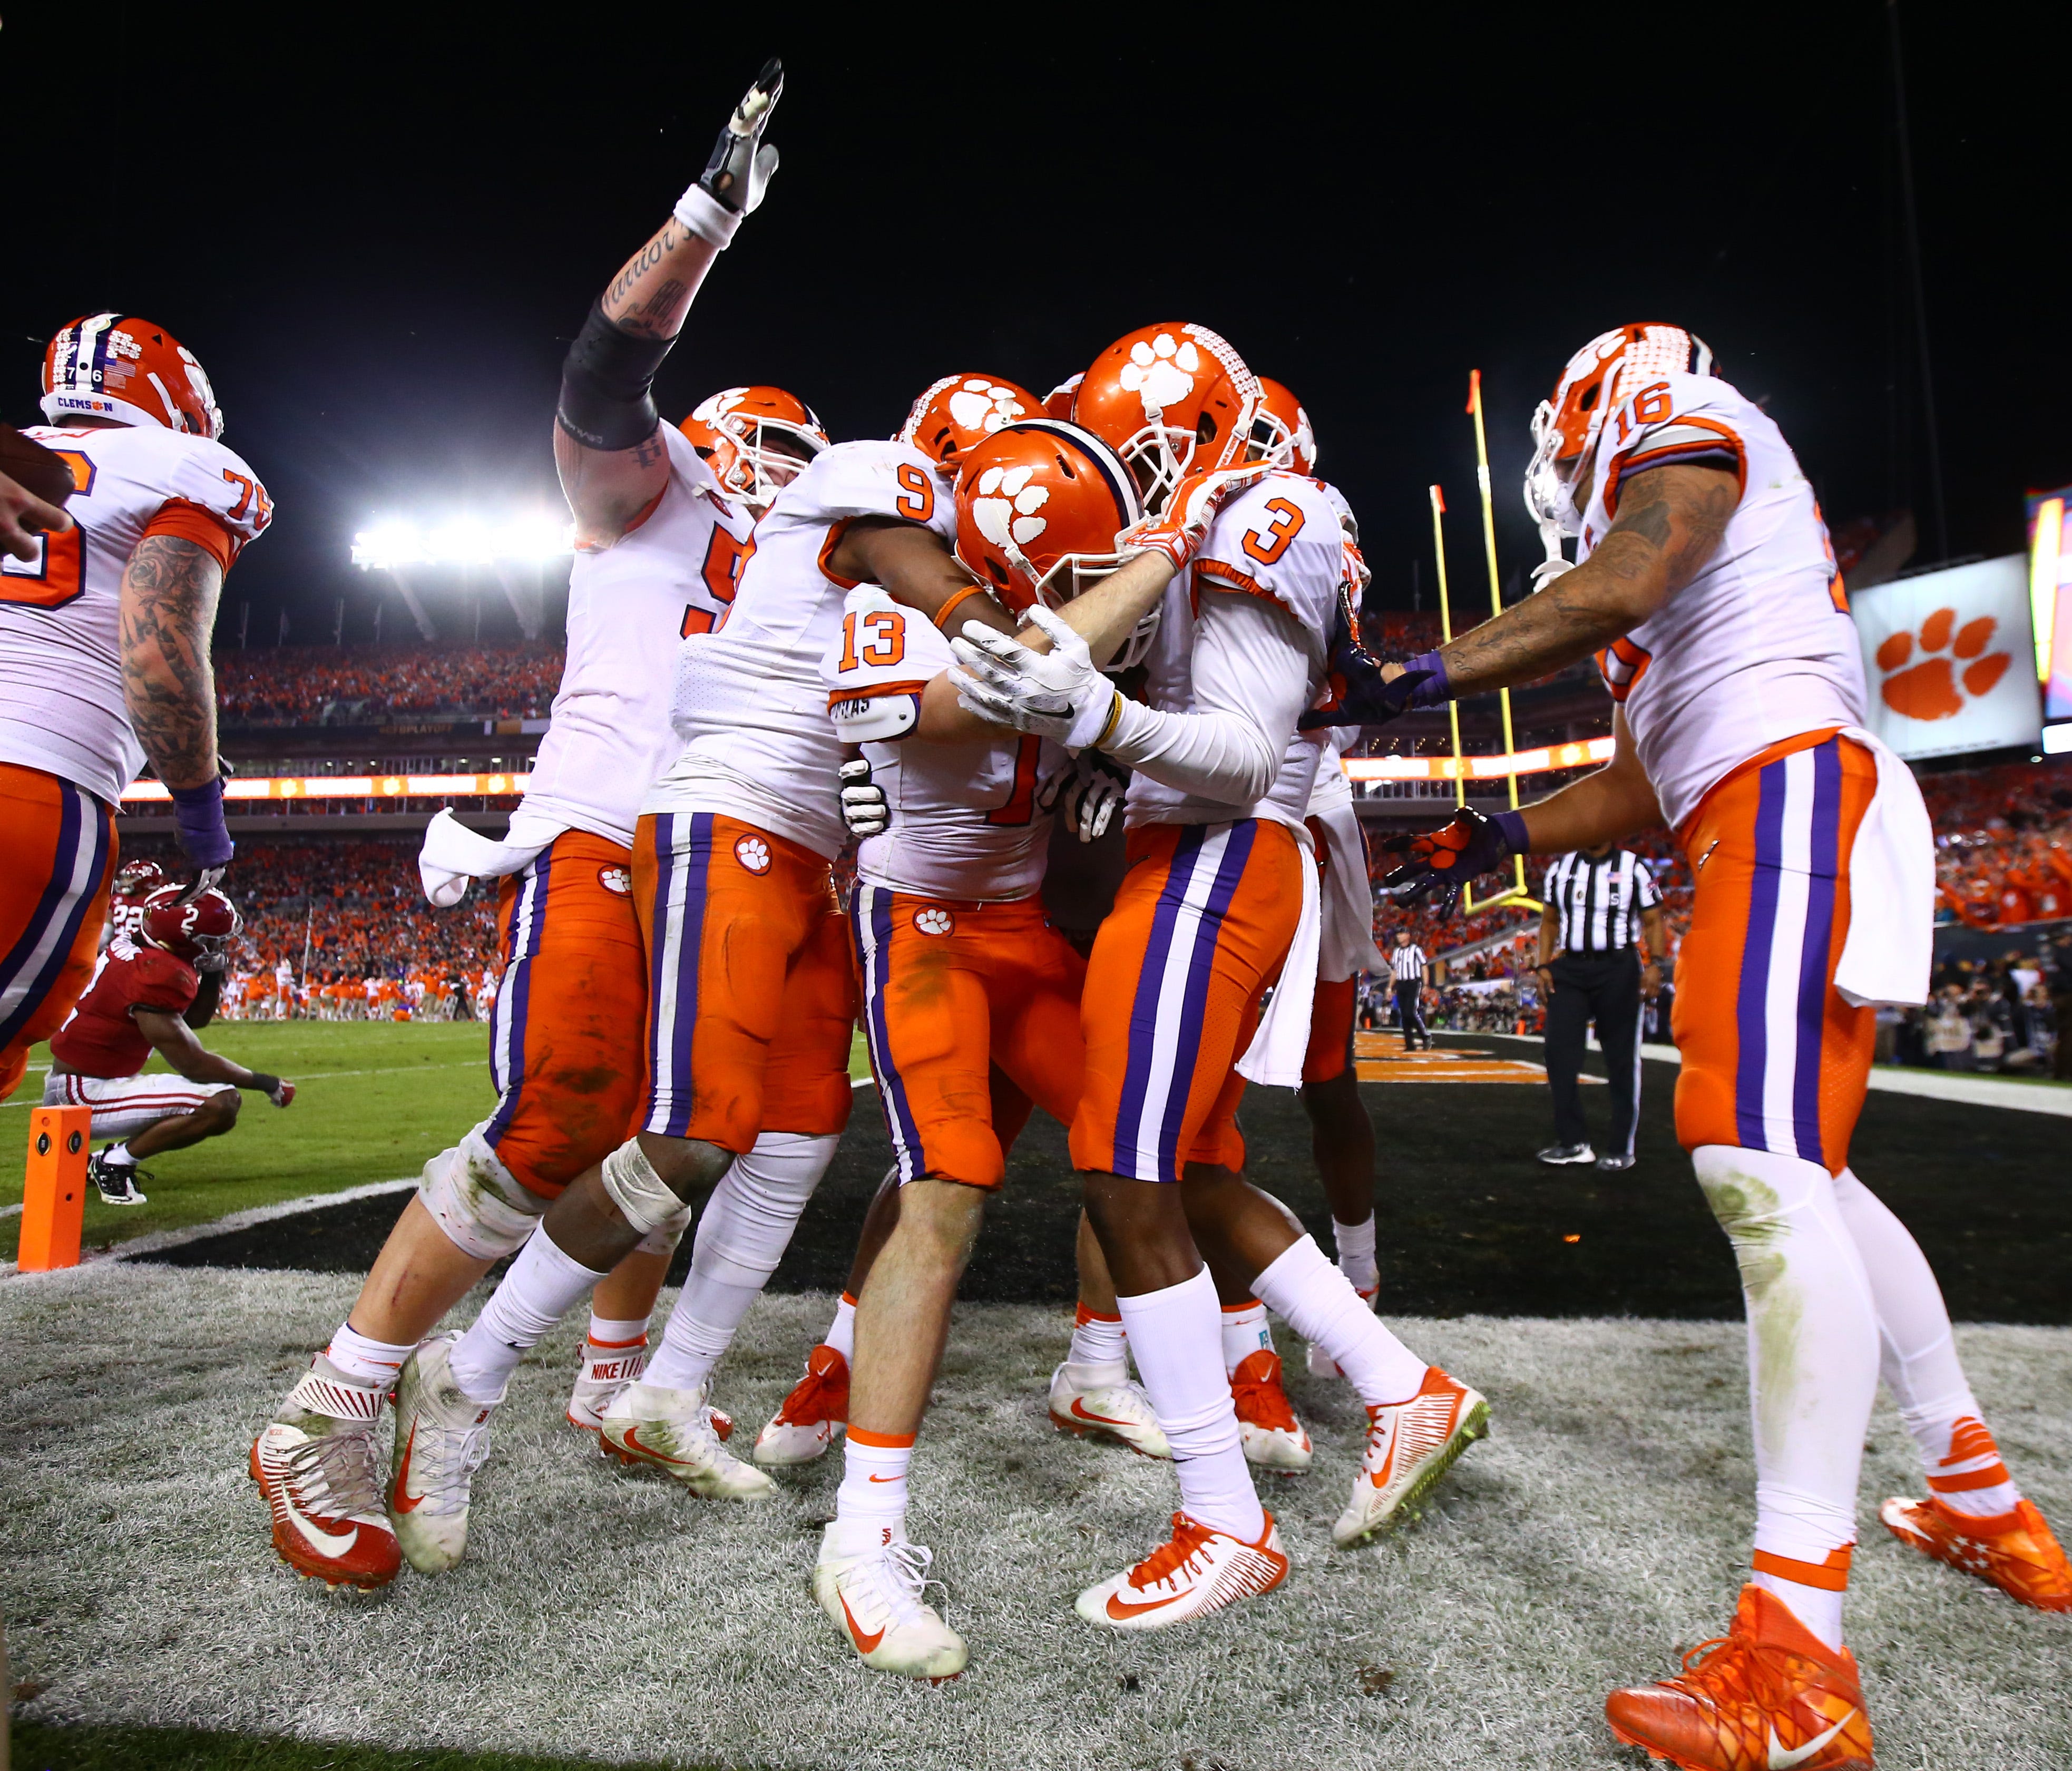 The Clemson Tigers celebrate with wide receiver Hunter Renfrow (13) after scoring the game winning touchdown against the Alabama Crimson Tide in the 2017 College Football Playoff National Championship Game at Raymond James Stadium.